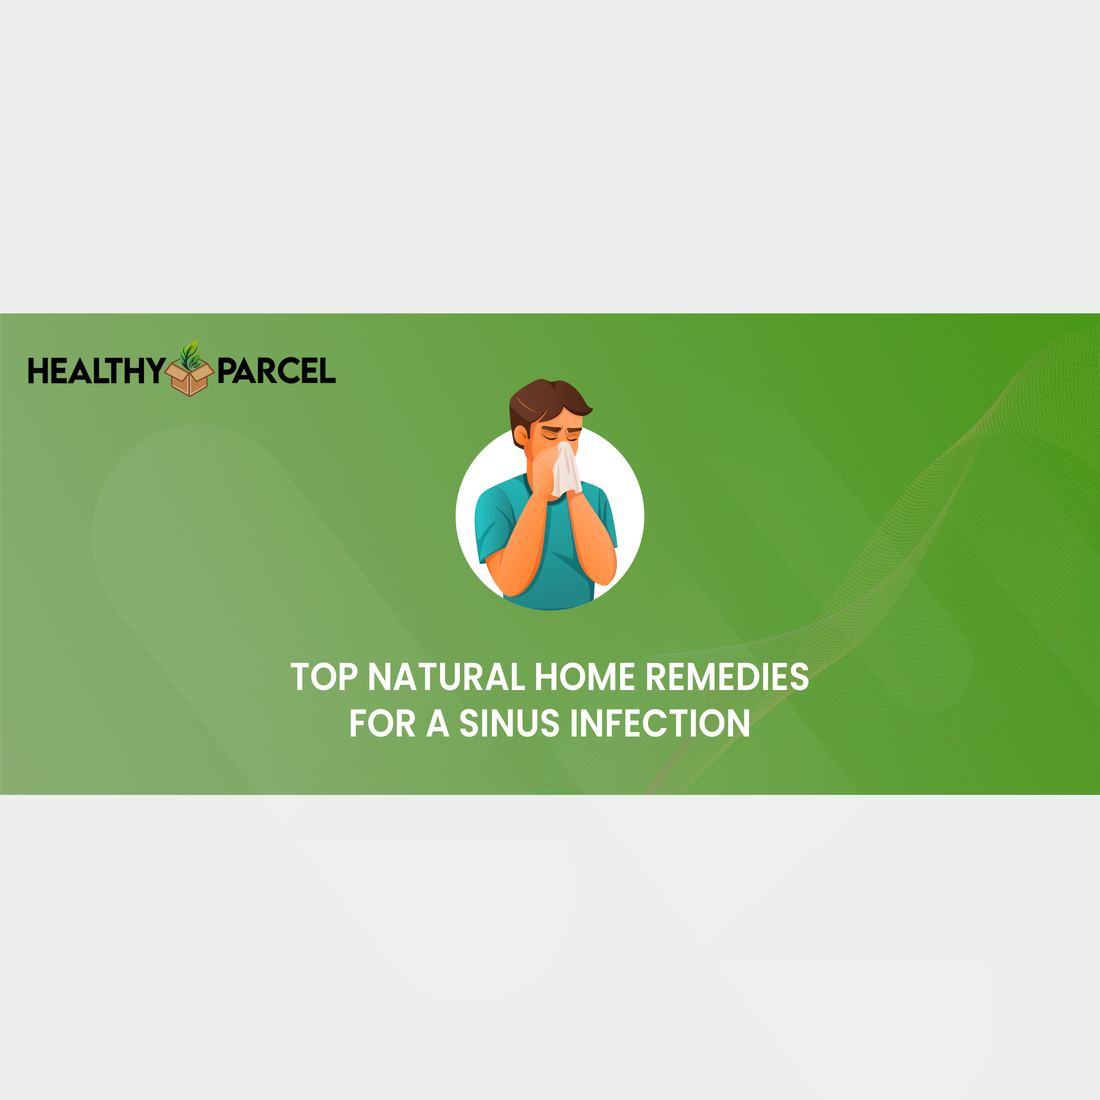 Top Natural Home Remedies for a Sinus Infection